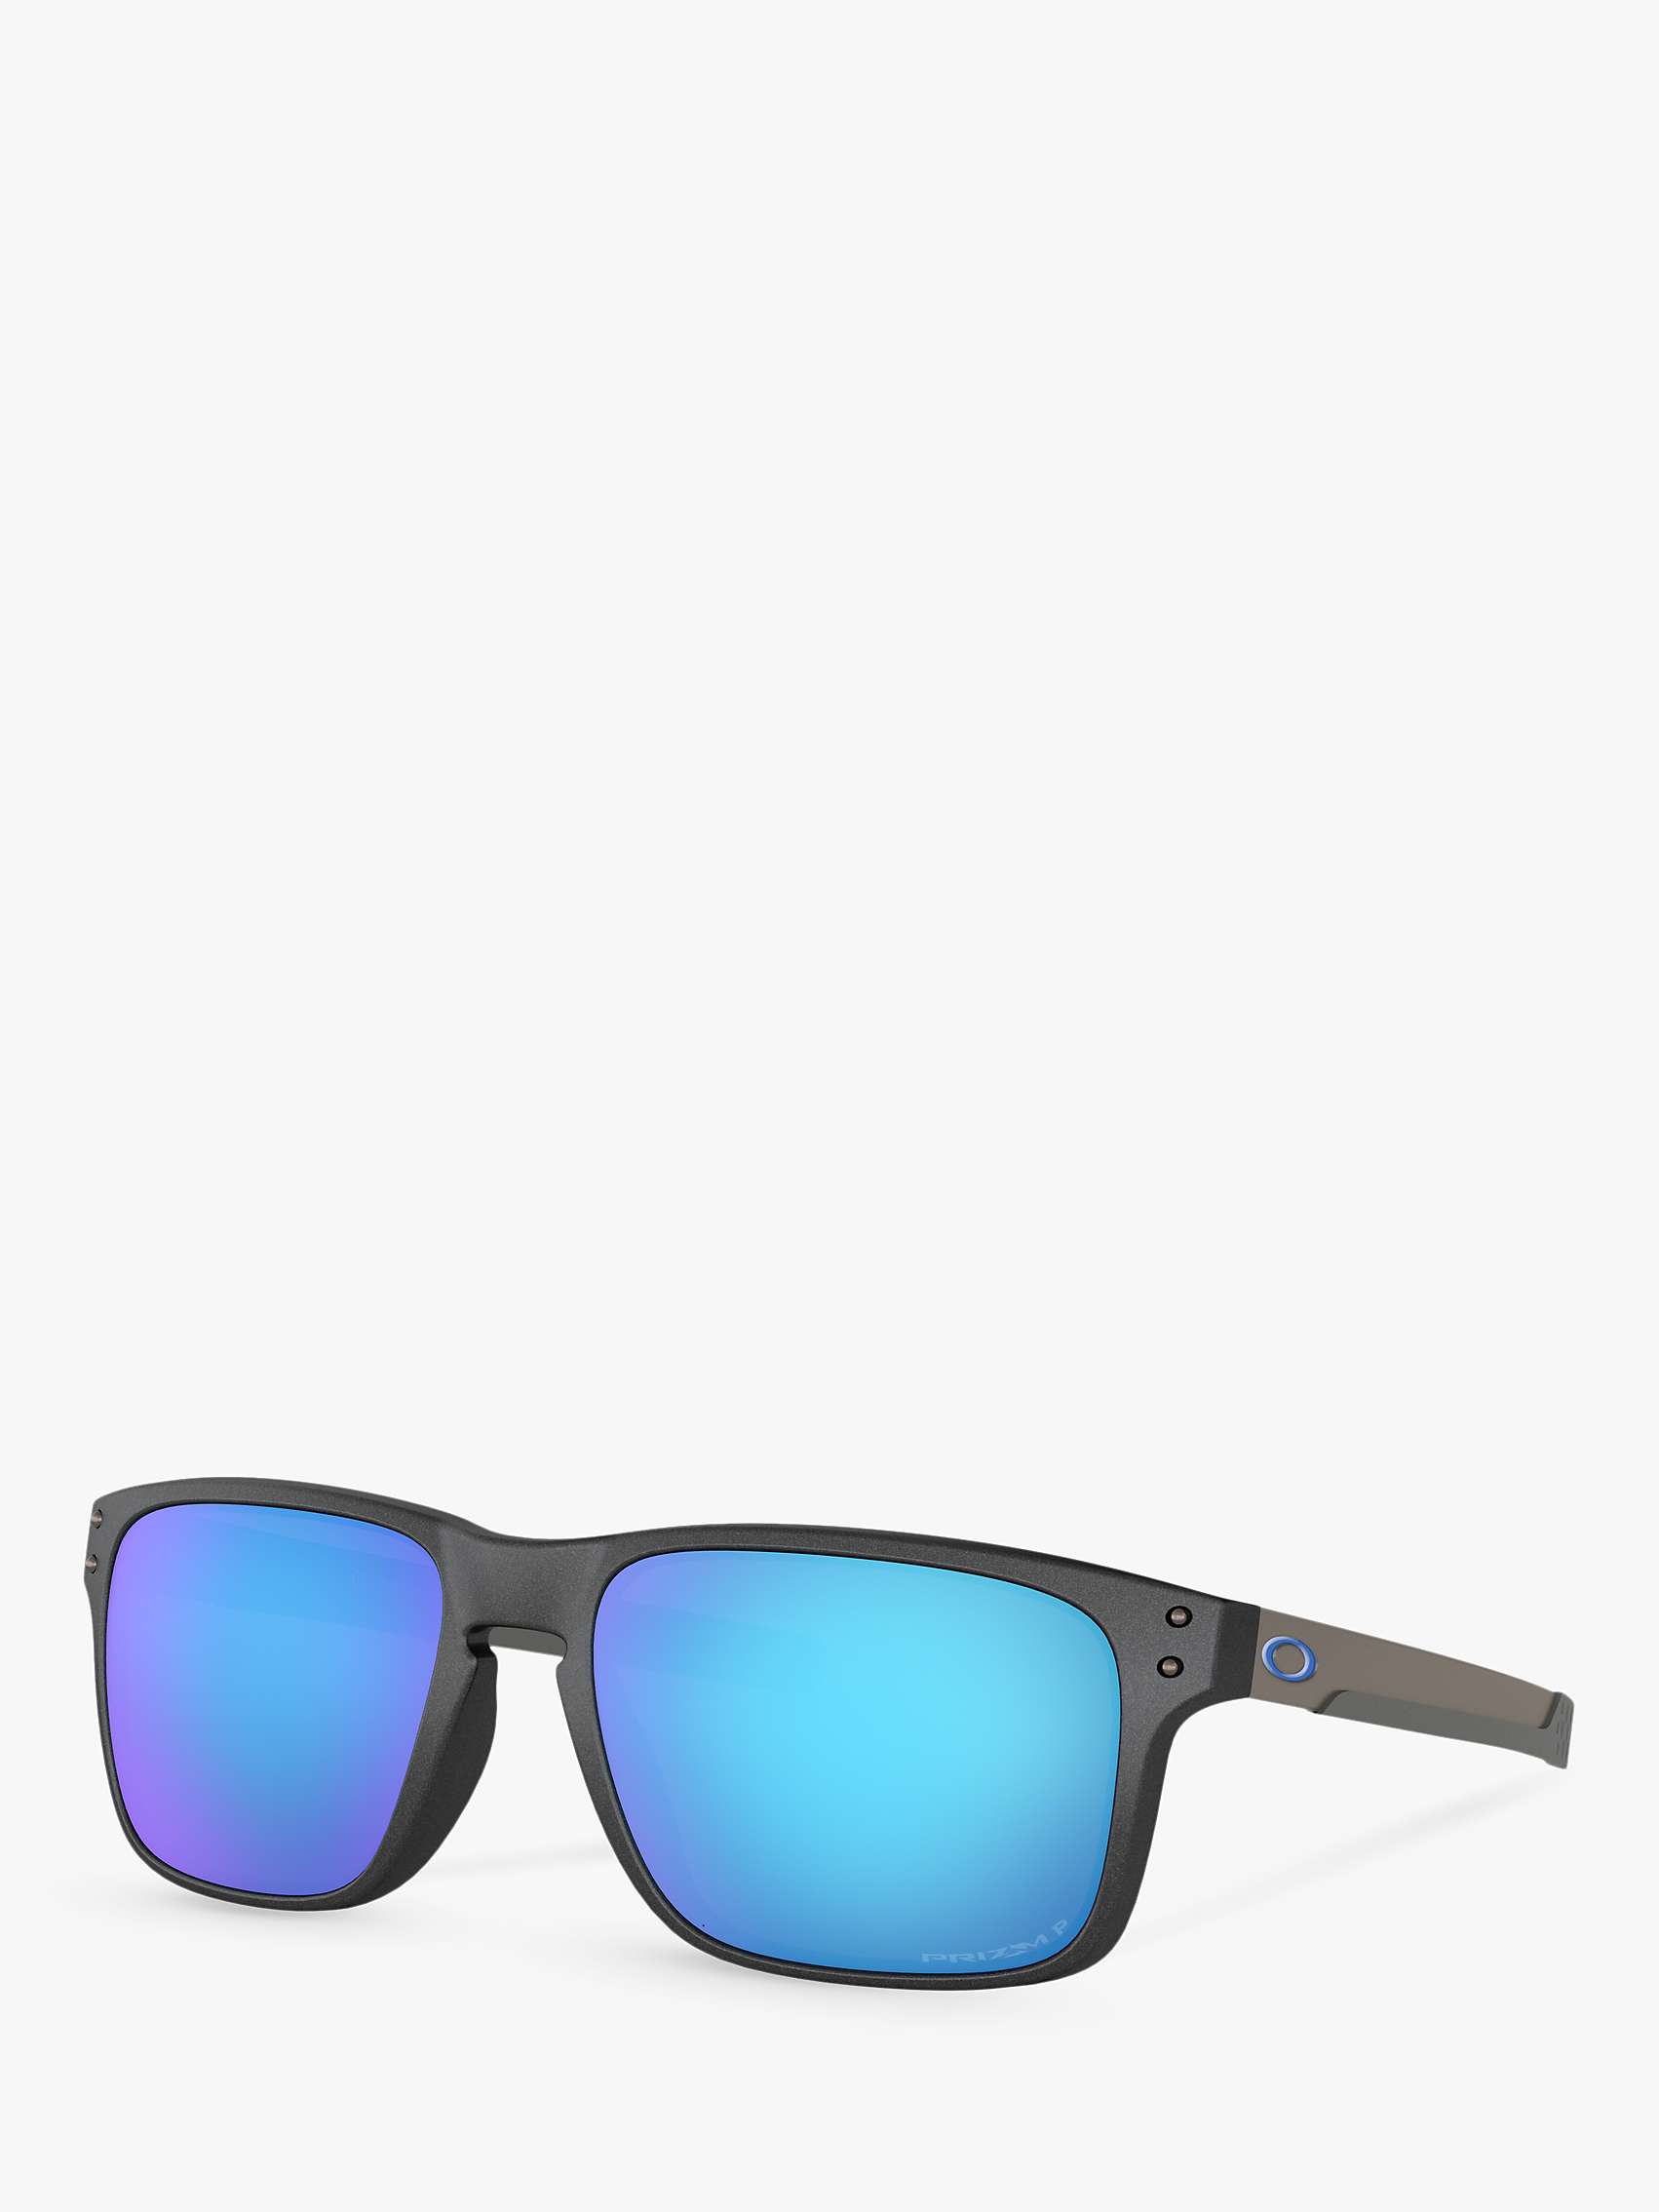 What is the price of Oakley sunglasses?